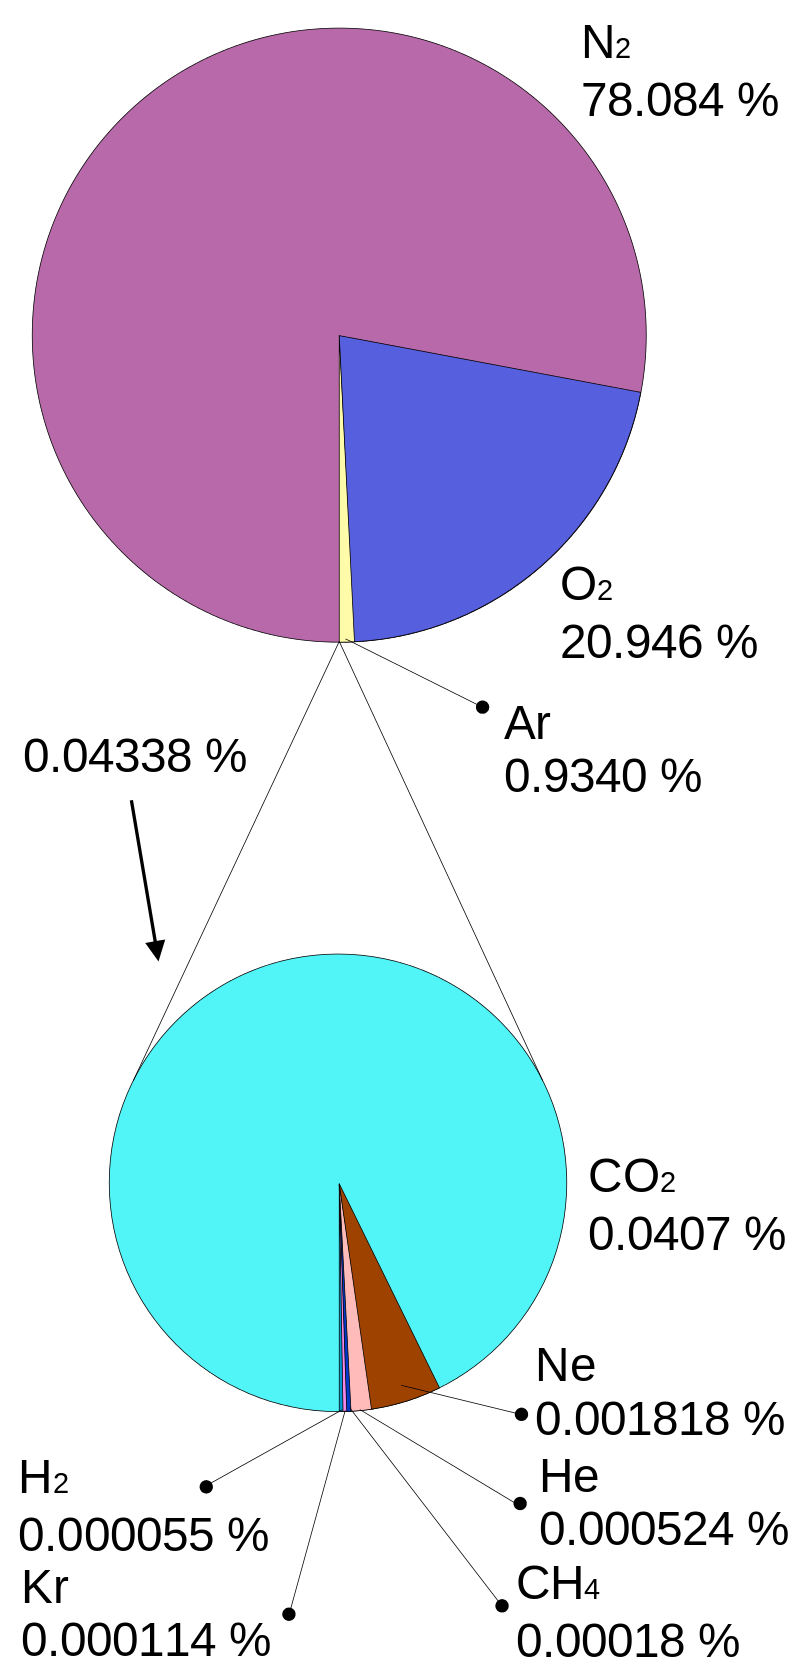 Graphic of two pie charts illustration the composition of Earth's atmosphere